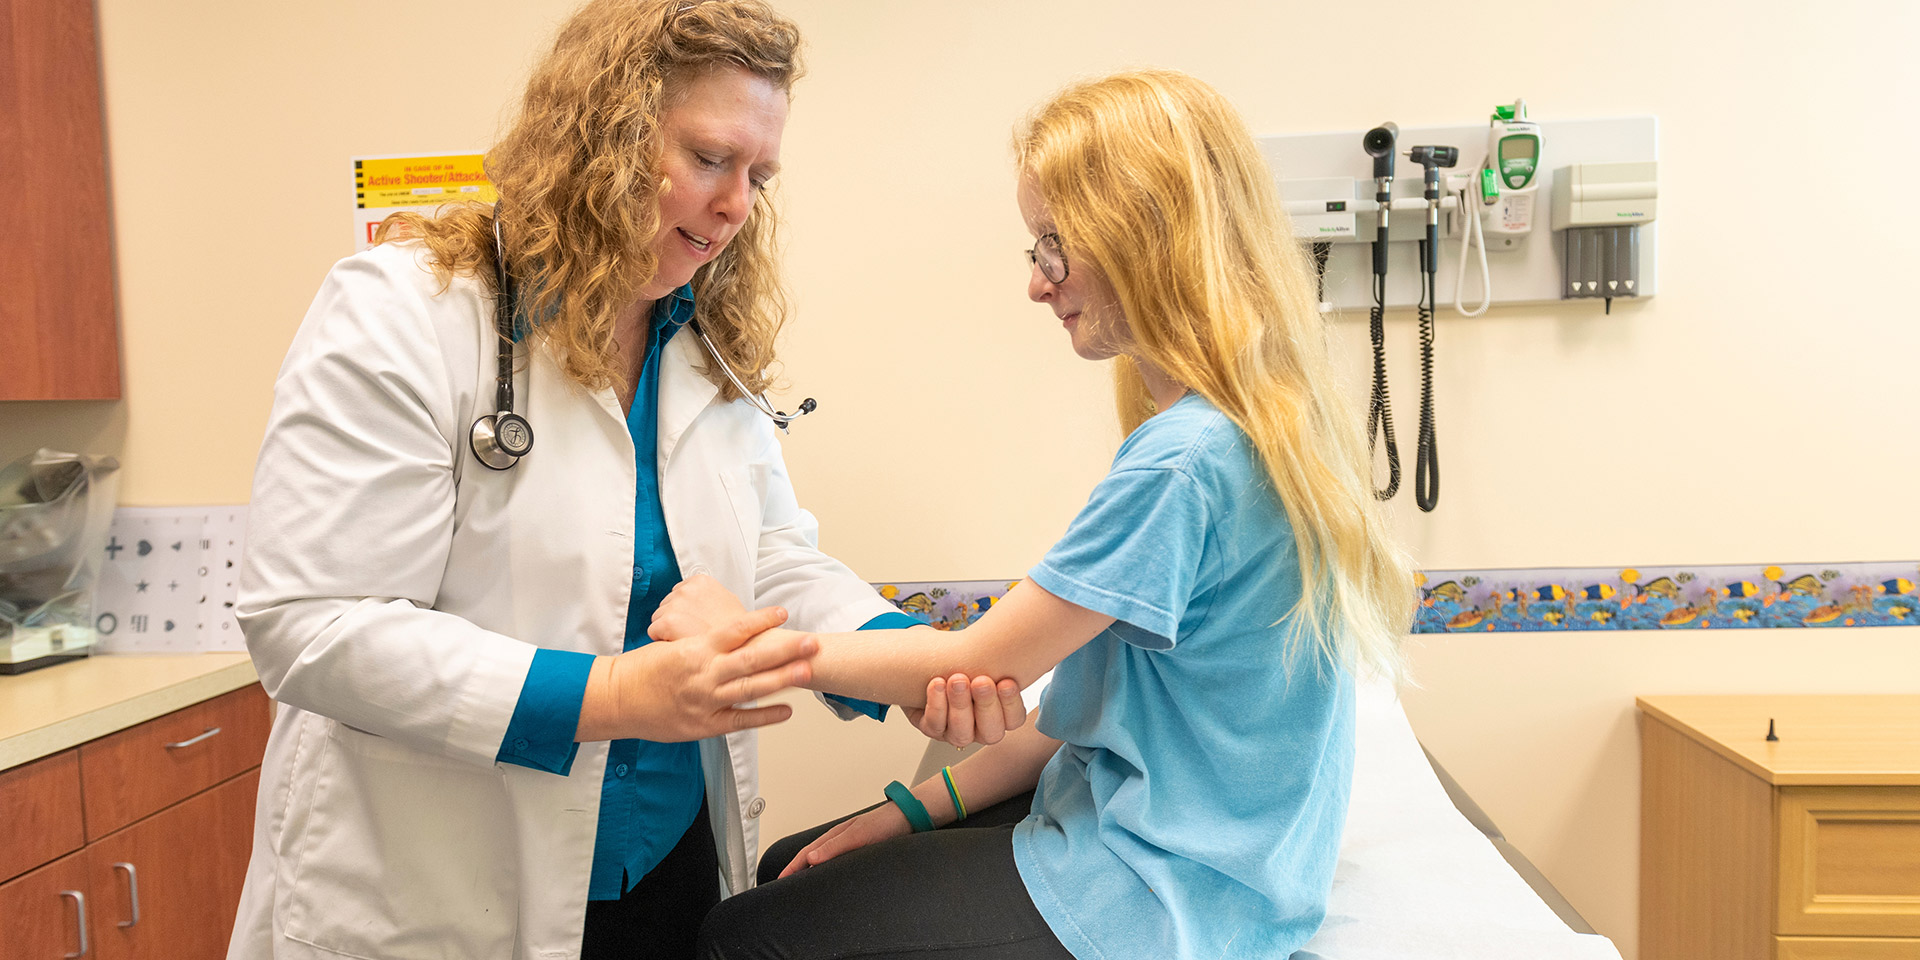 A nurse examines the arm of a child patient.